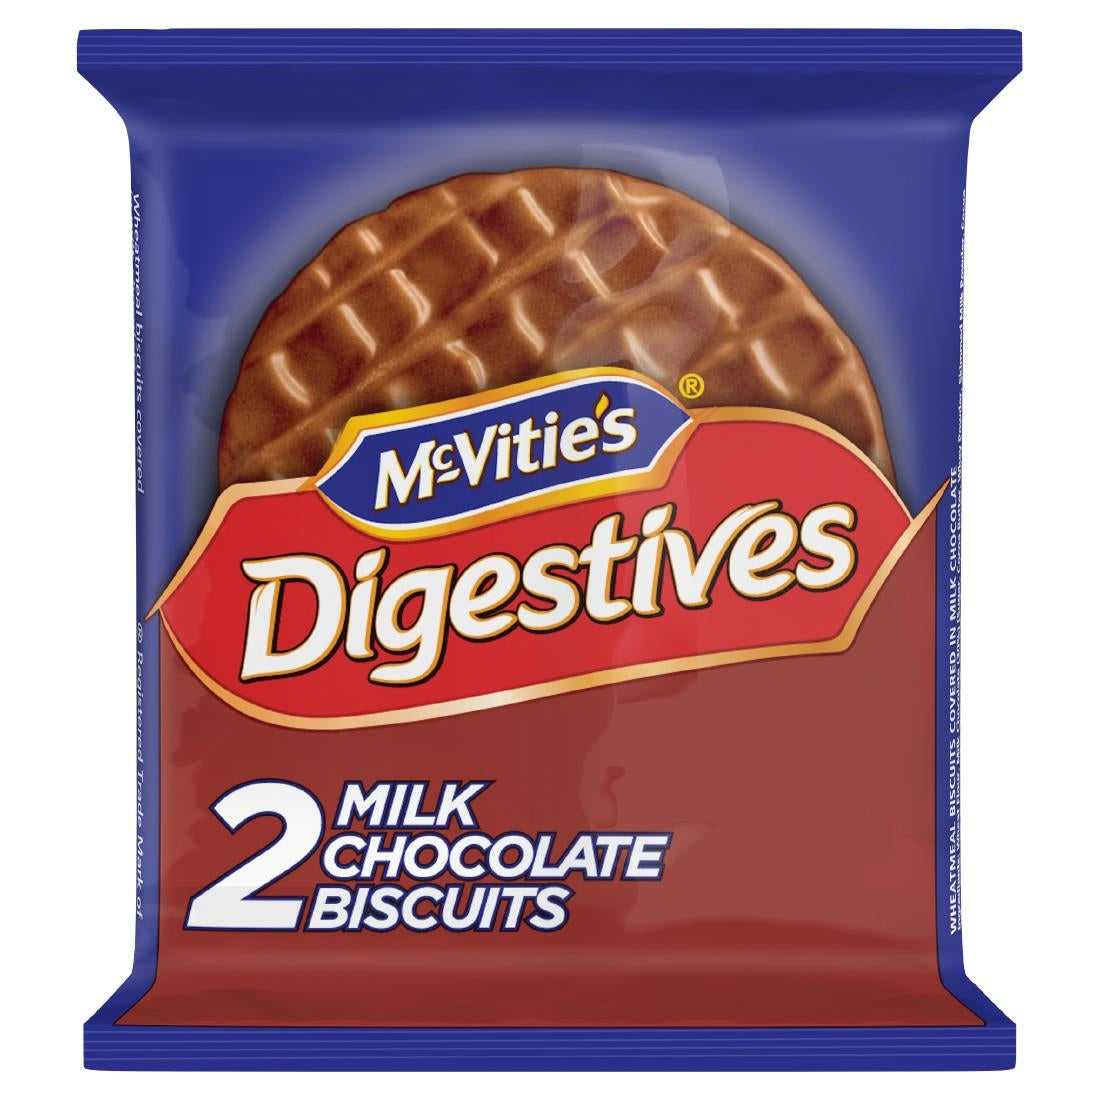 CZ289 McVitie's Milk Chocolate Digestives Twin Biscuit Packs (Pack of 24 x 2 Biscuits) JD Catering Equipment Solutions Ltd